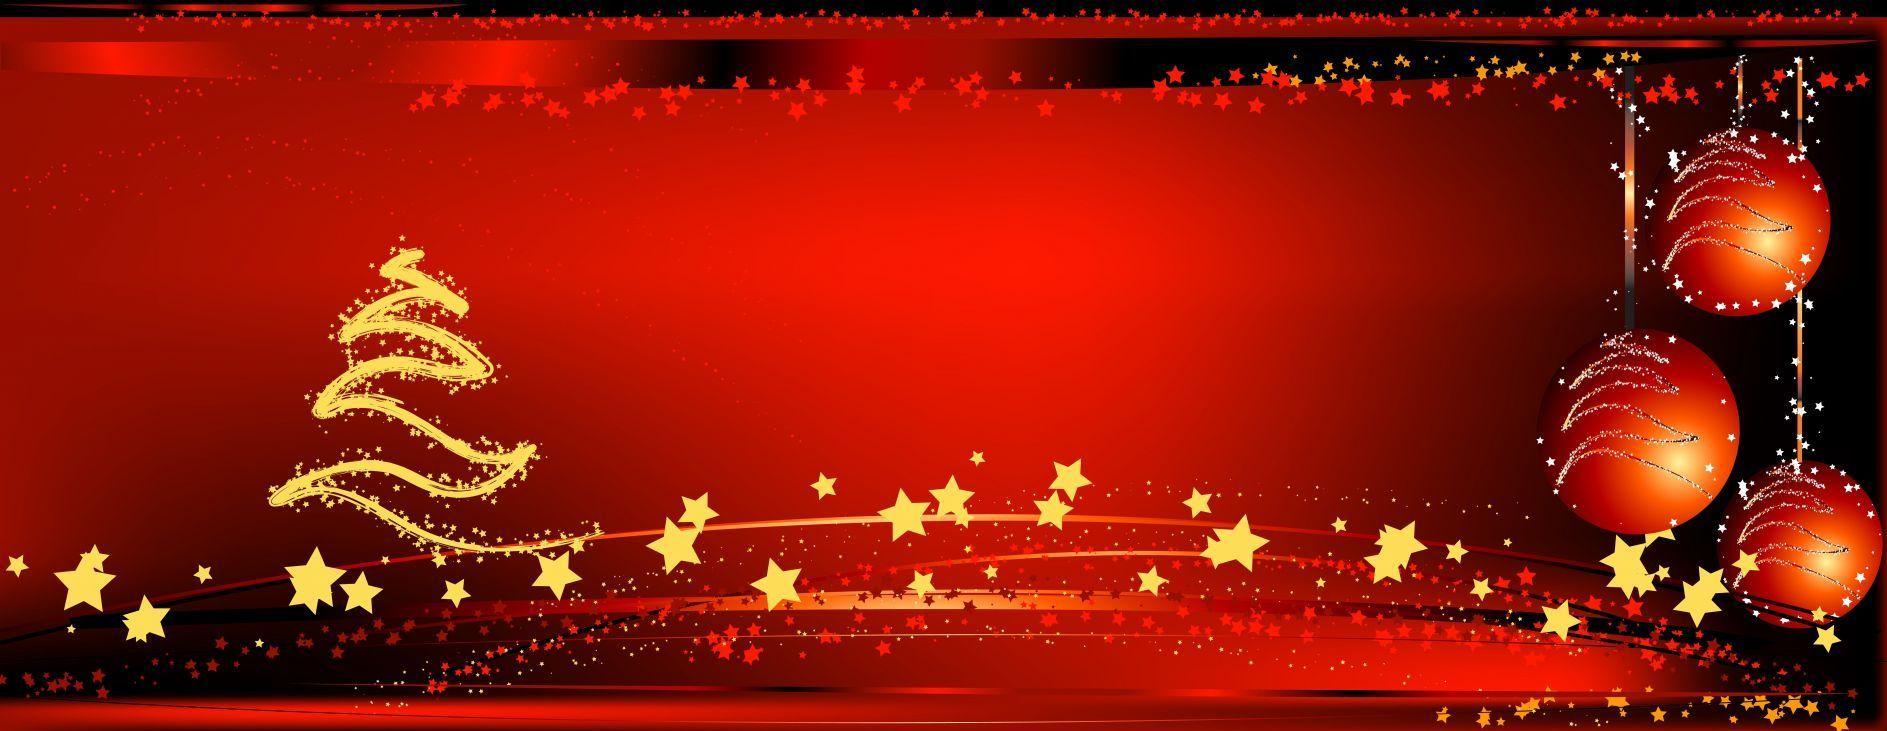 Happy Holidays 2012 Background HD Background 9 HD Wallpaper